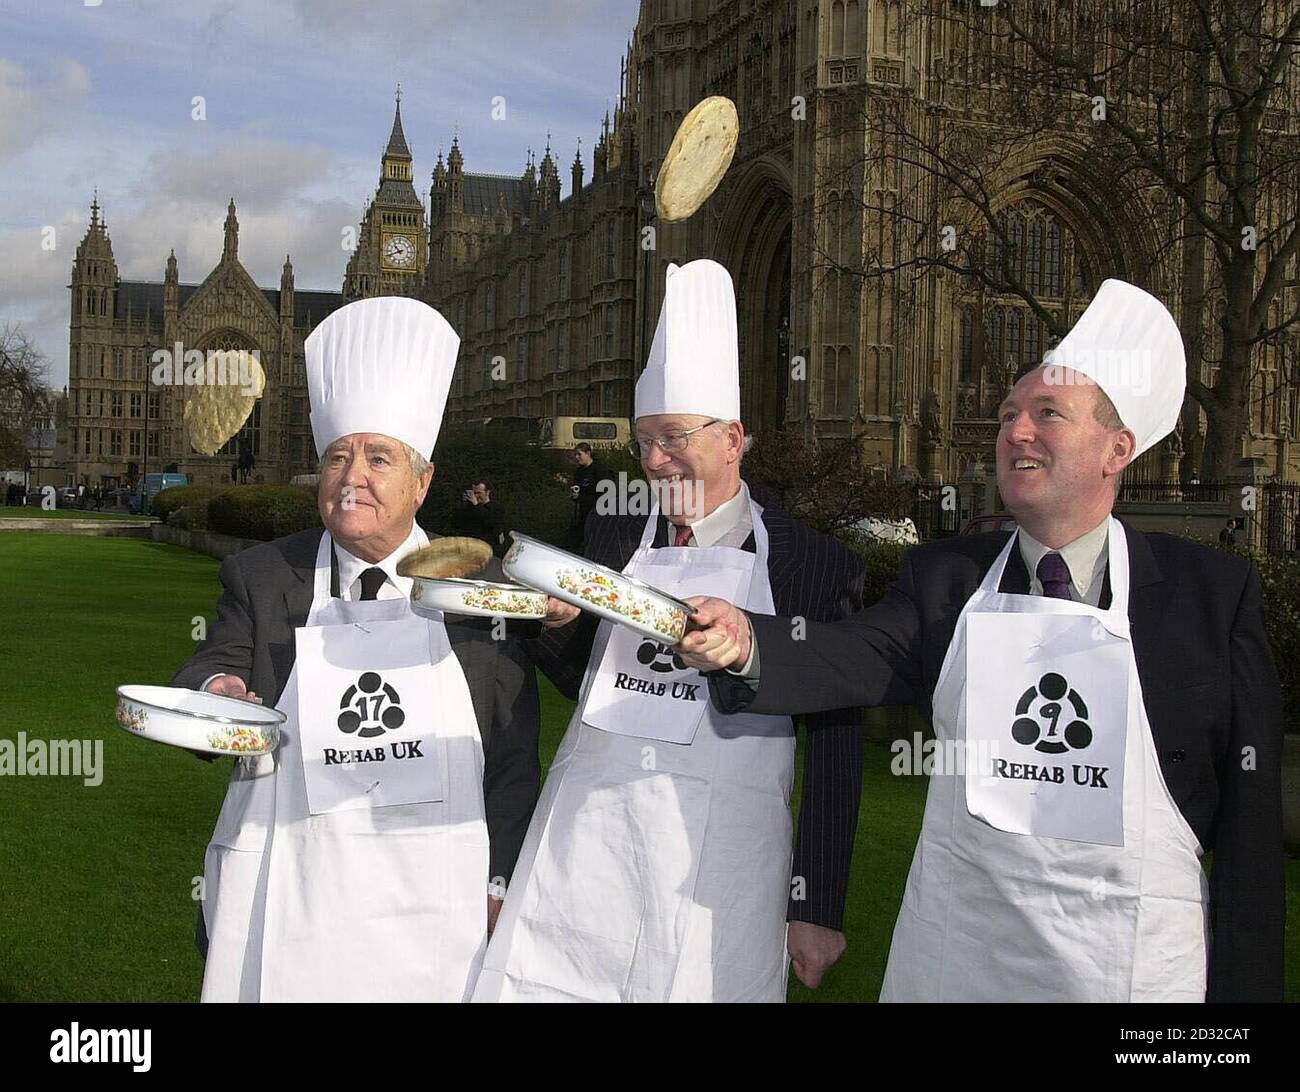 Lord Morris of Manchester (left), Brian Iddon, MP for Bolton and Sale East and Paul Goggins MP for Wythenshawe (left) take part in the annual Shrove Tuesday Parliamentary pancake race on the green opposite the House of Lords in Westminster, London.   *  The event, in aid of brain injury charity Rehab UK, involves a team of MPs and a team from the Lords donning tall chefs' hats and whites and racing each other while tossing pancakes three feet into the air. Stock Photo